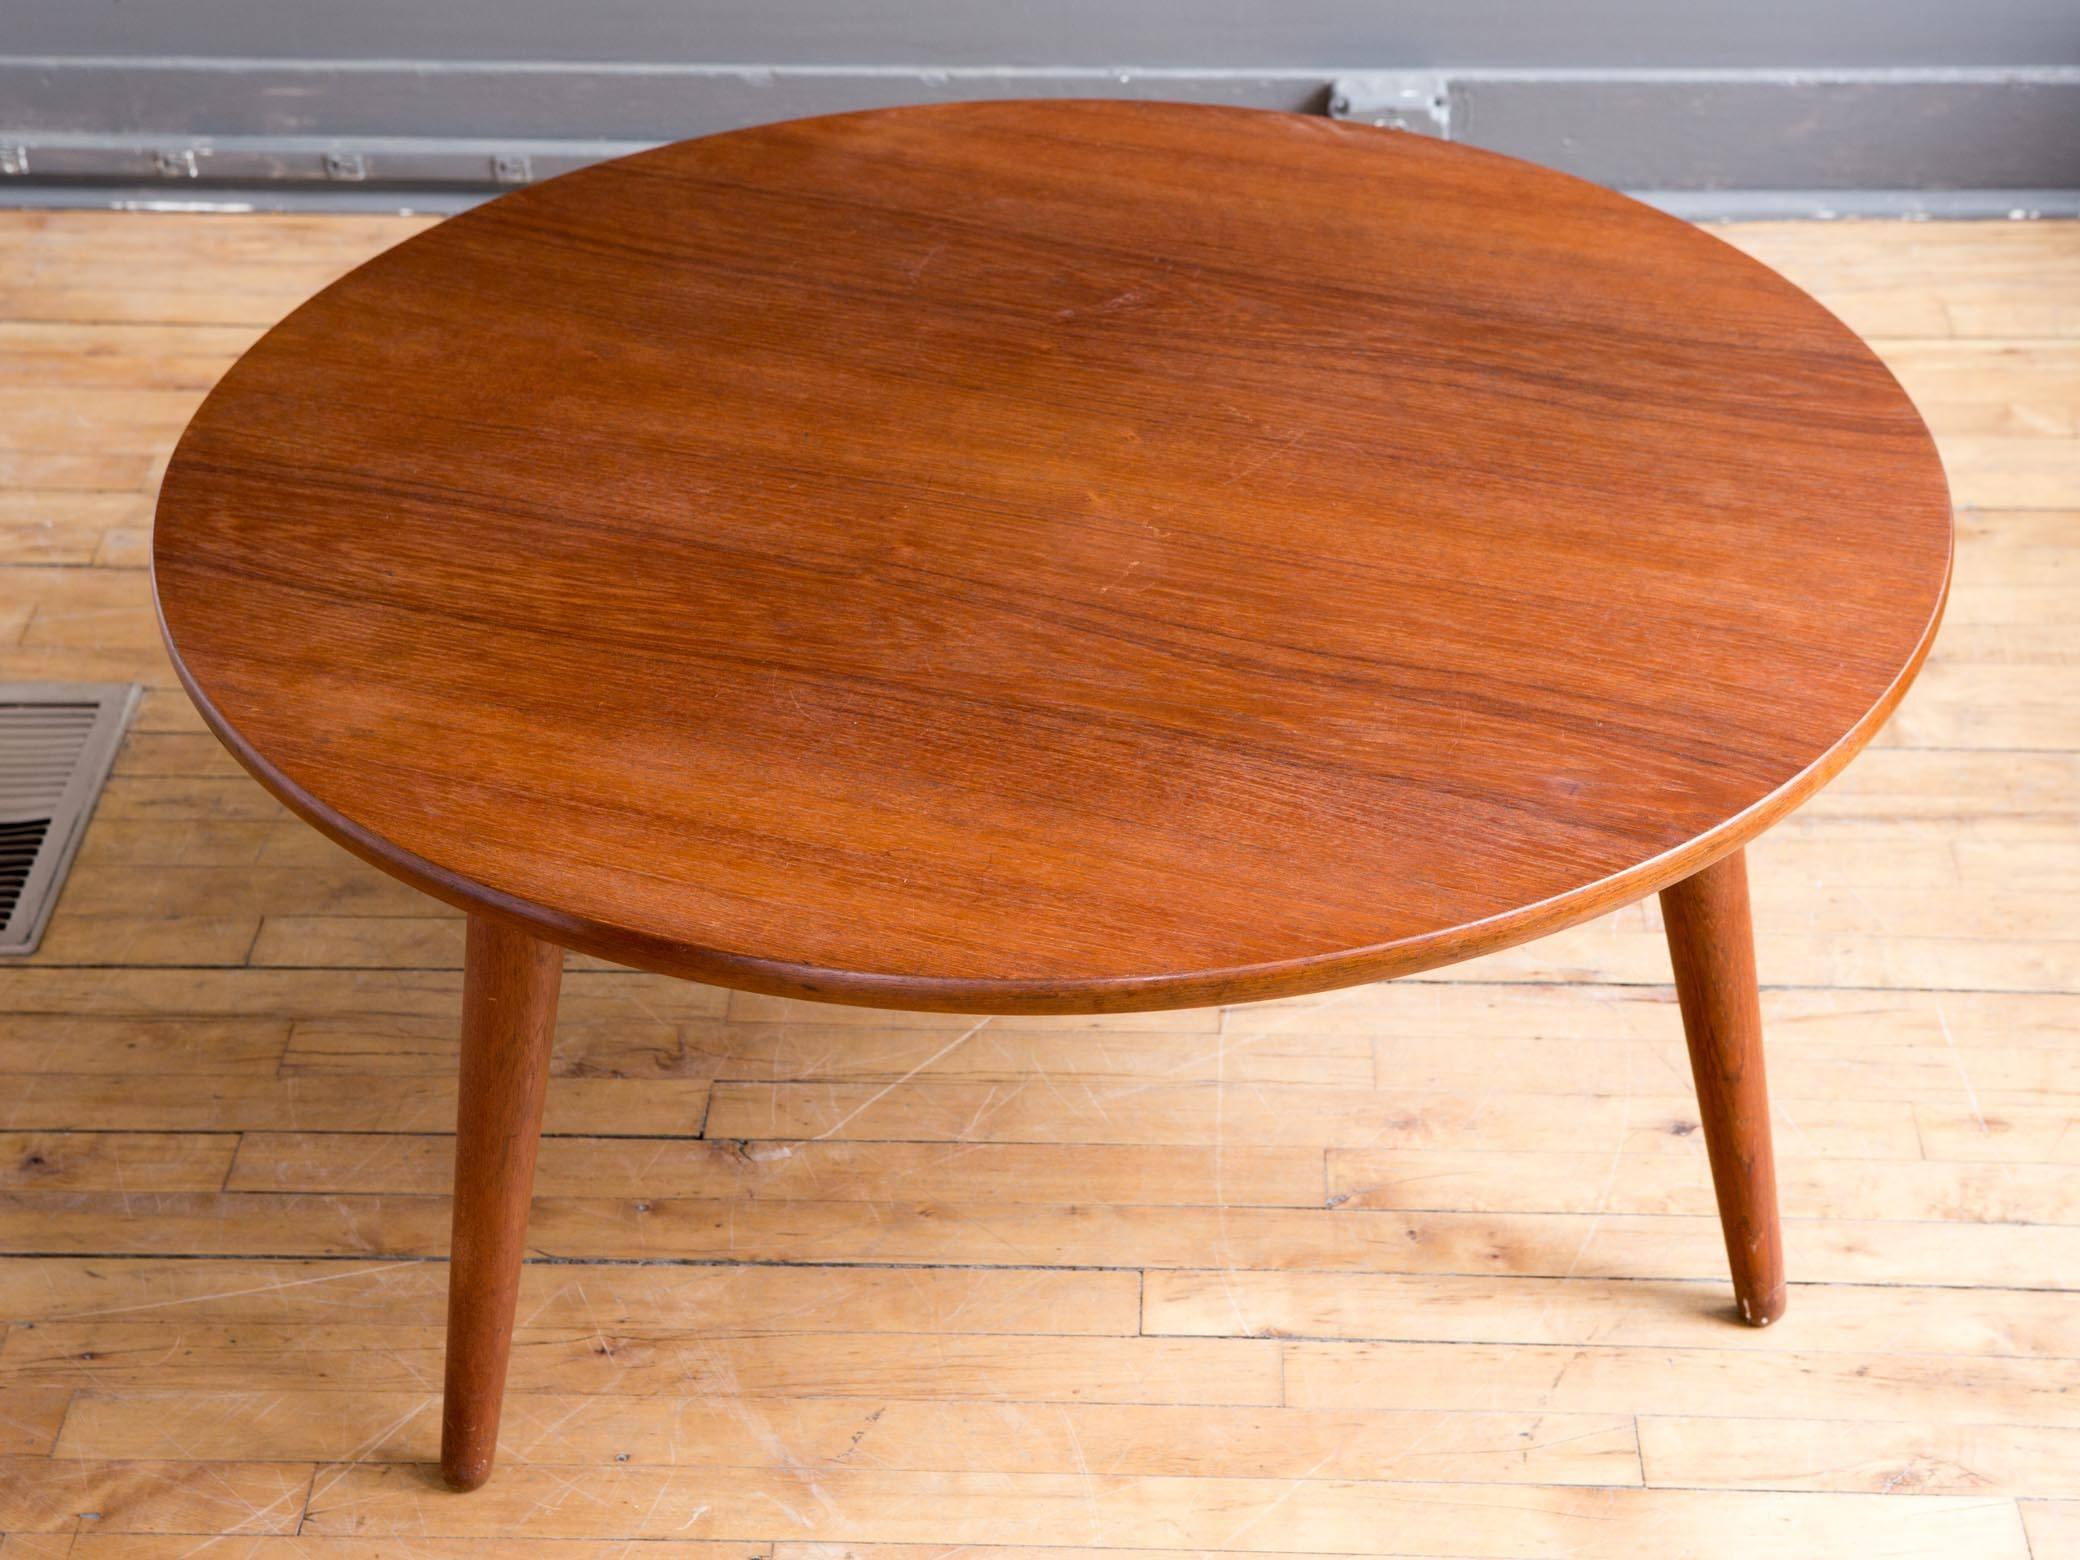 A teak coffee or cocktail table designed by Hans Wegner, circa 1950s. Manufactured by Andreas Tuck. Featuring a generous circular top with attractive graining supported by three conical splayed legs. Branded manufacturer's mark to underside.